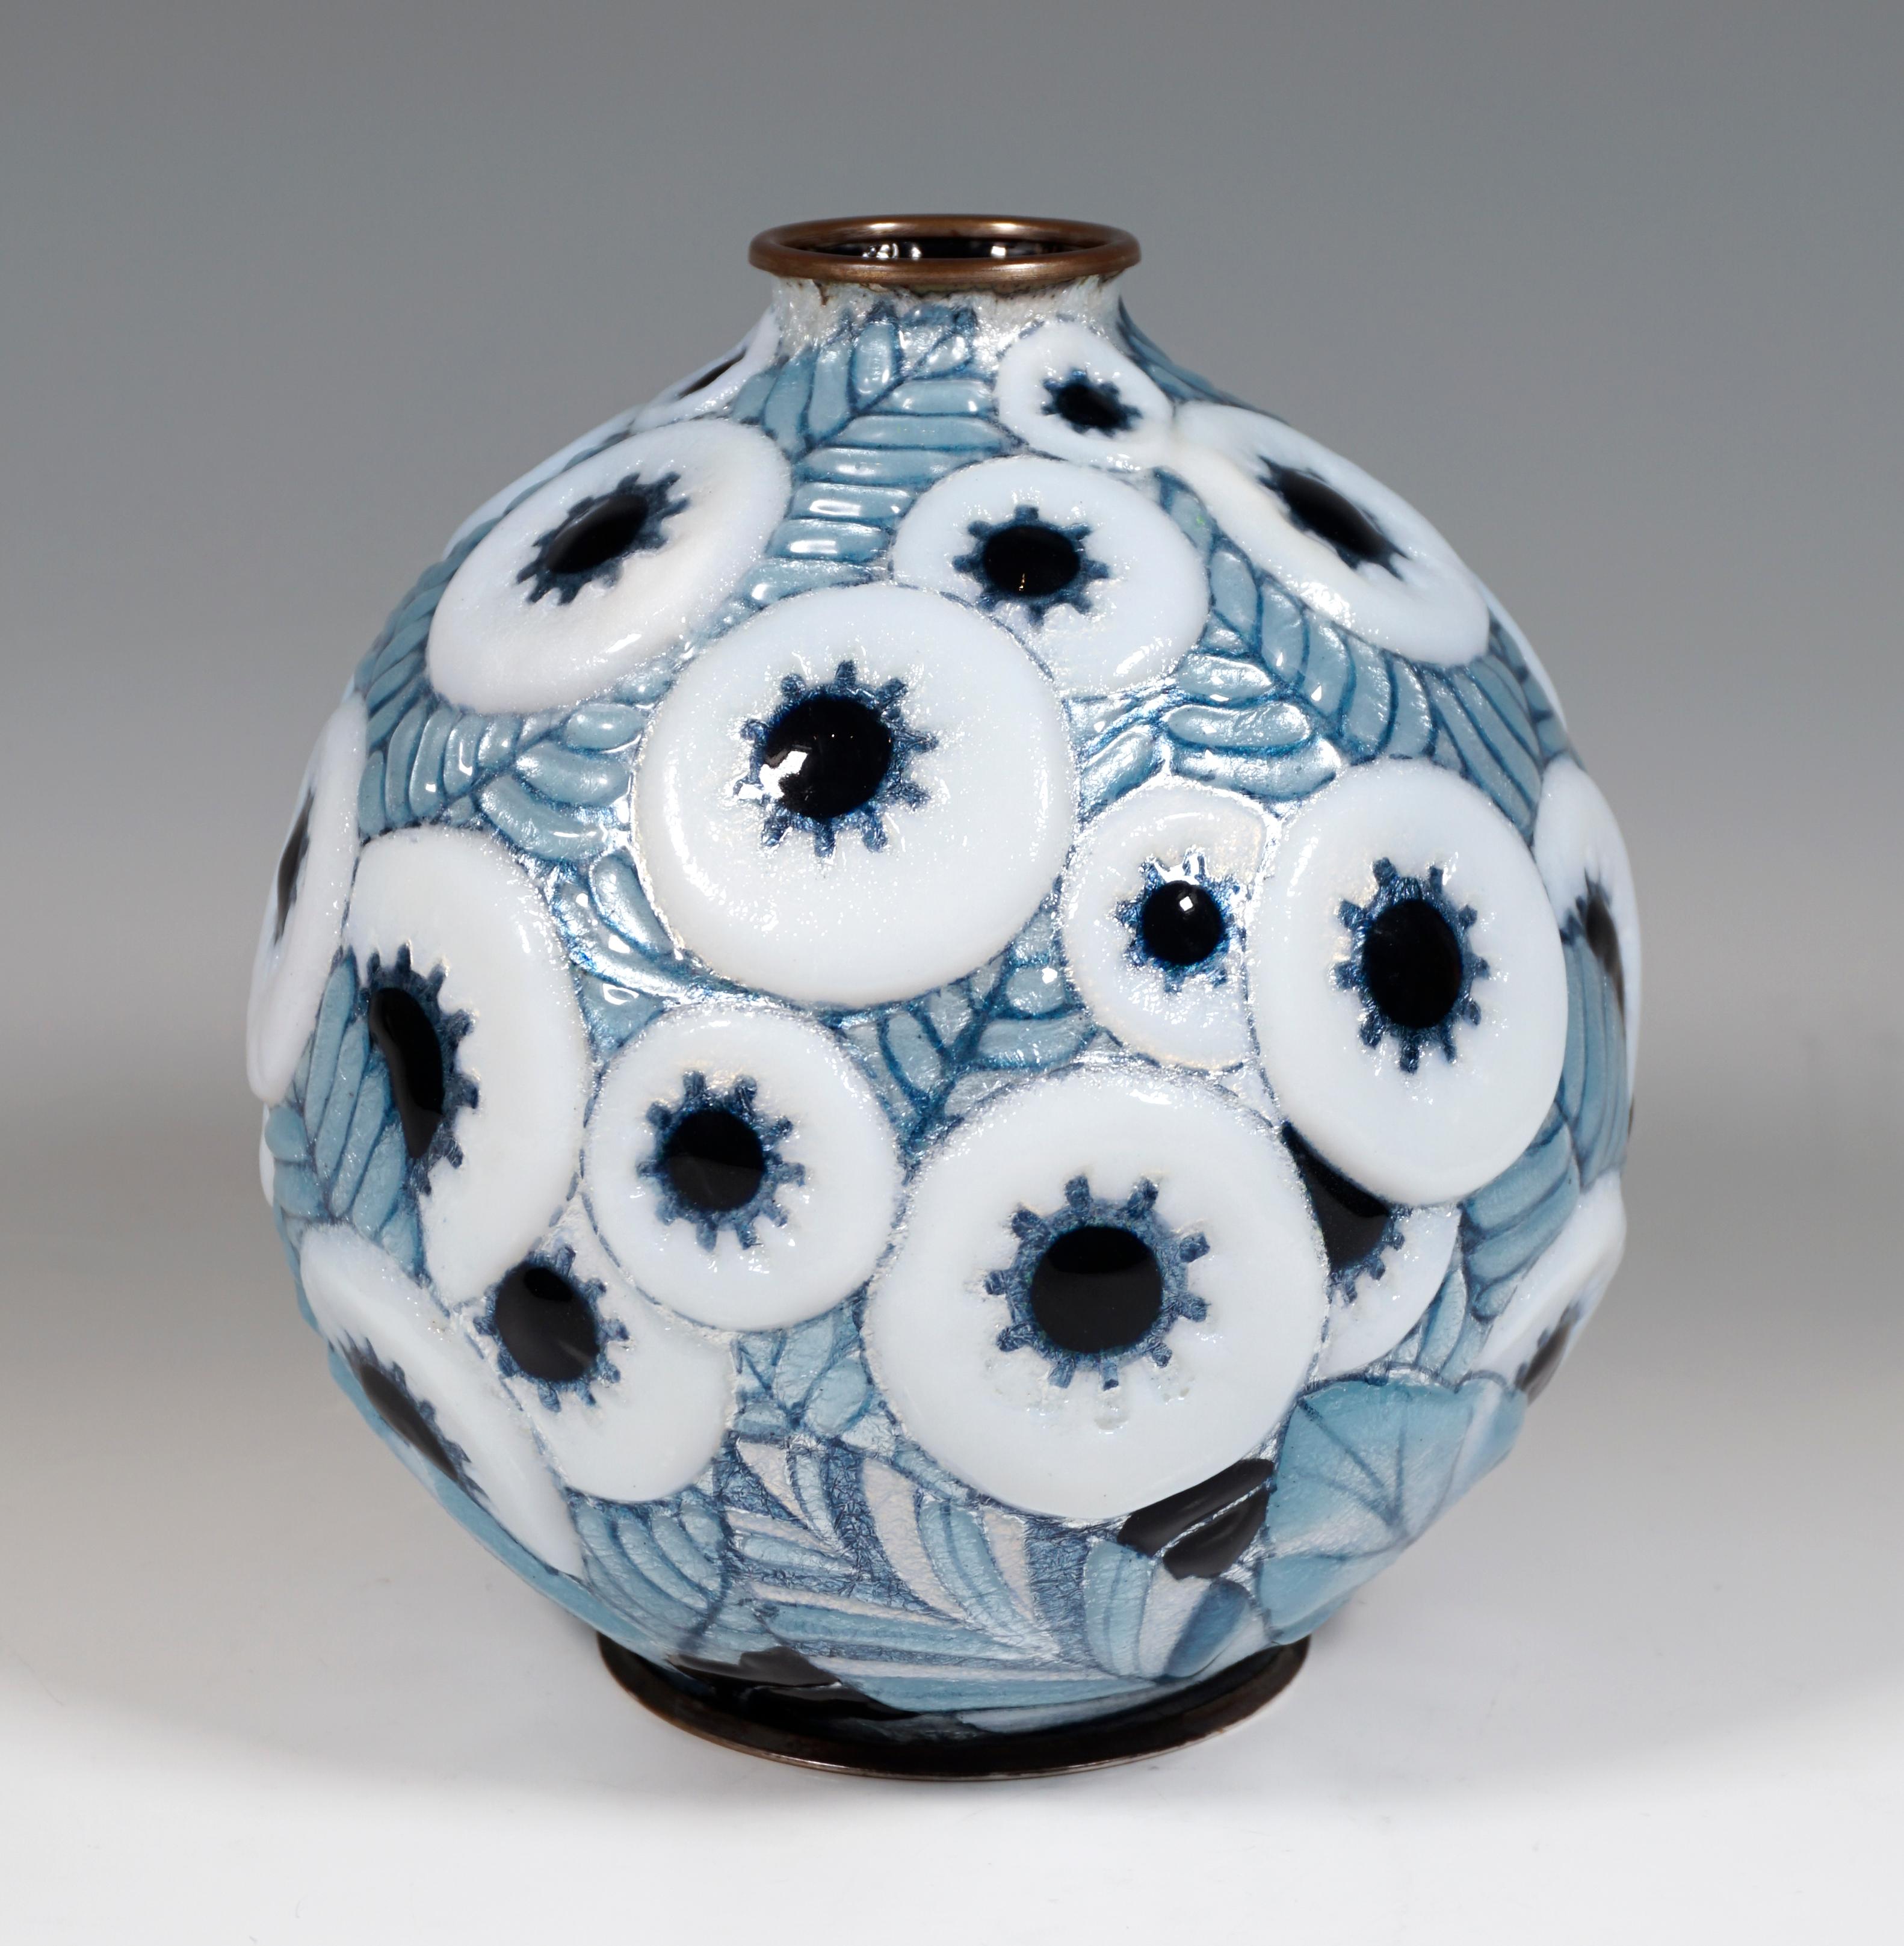 Spherical vessel on a round, grooved metal stand, coated in silver and with pasty applied, polychrome and iridescent geometric-floral enamel decoration in white and blue tones, irregularly glazed, inscribed 'C. FAURÉ LIMOGES.' on the inside of the